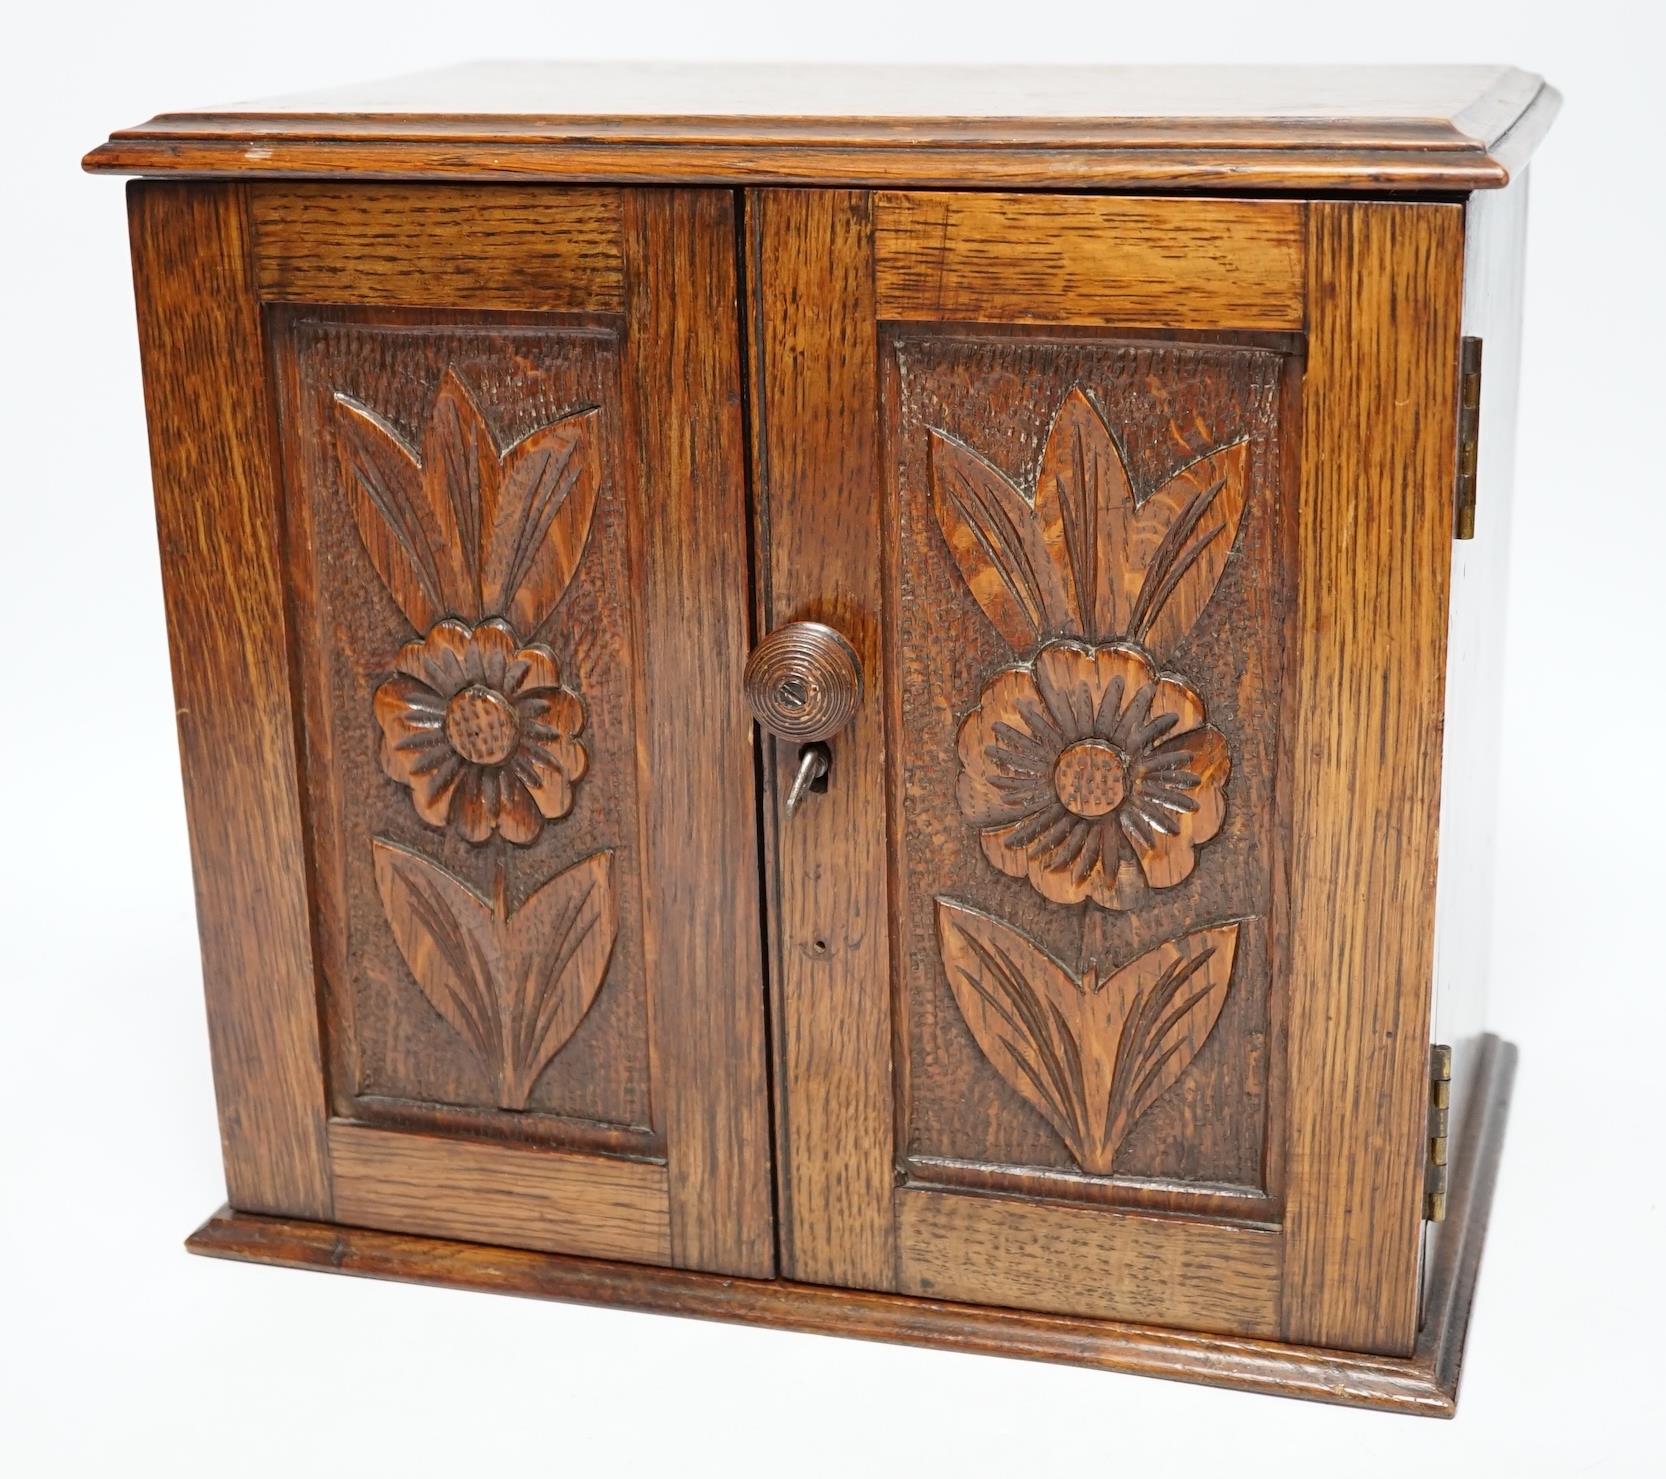 A carved oak smoker's compendium and accessories including cased cheroot holders, 25cm high